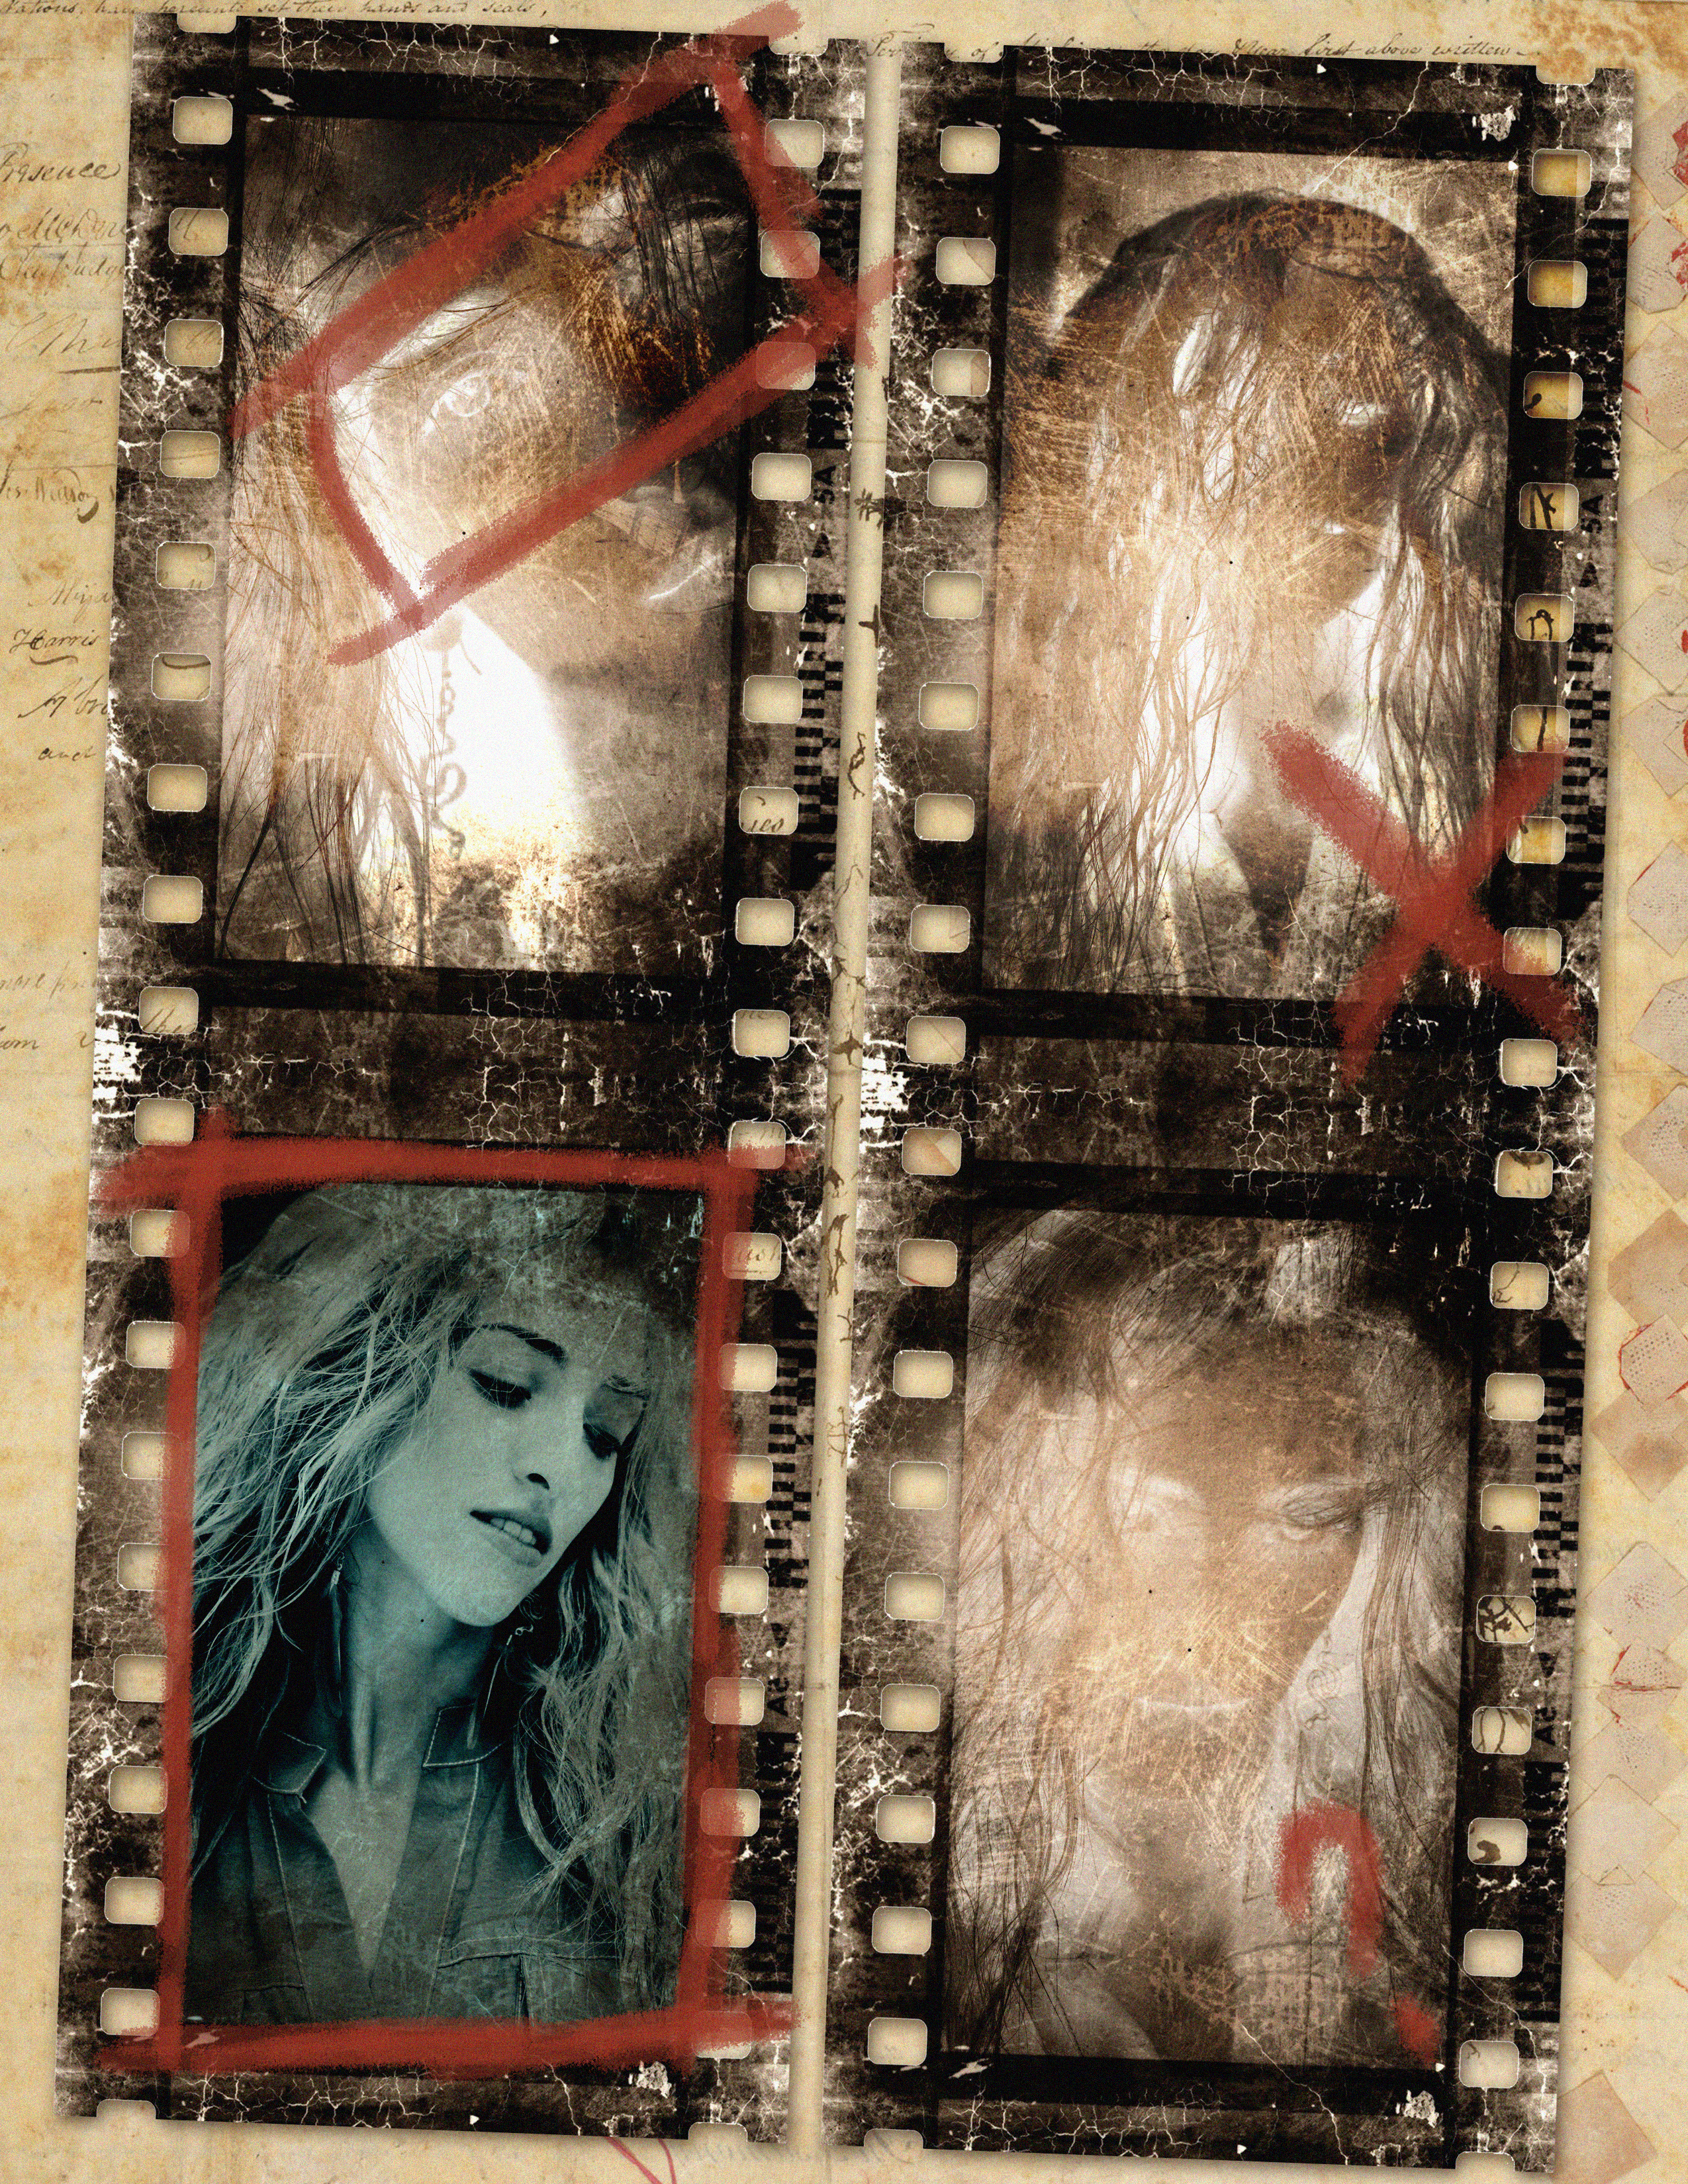 Contact Sheet rendition image